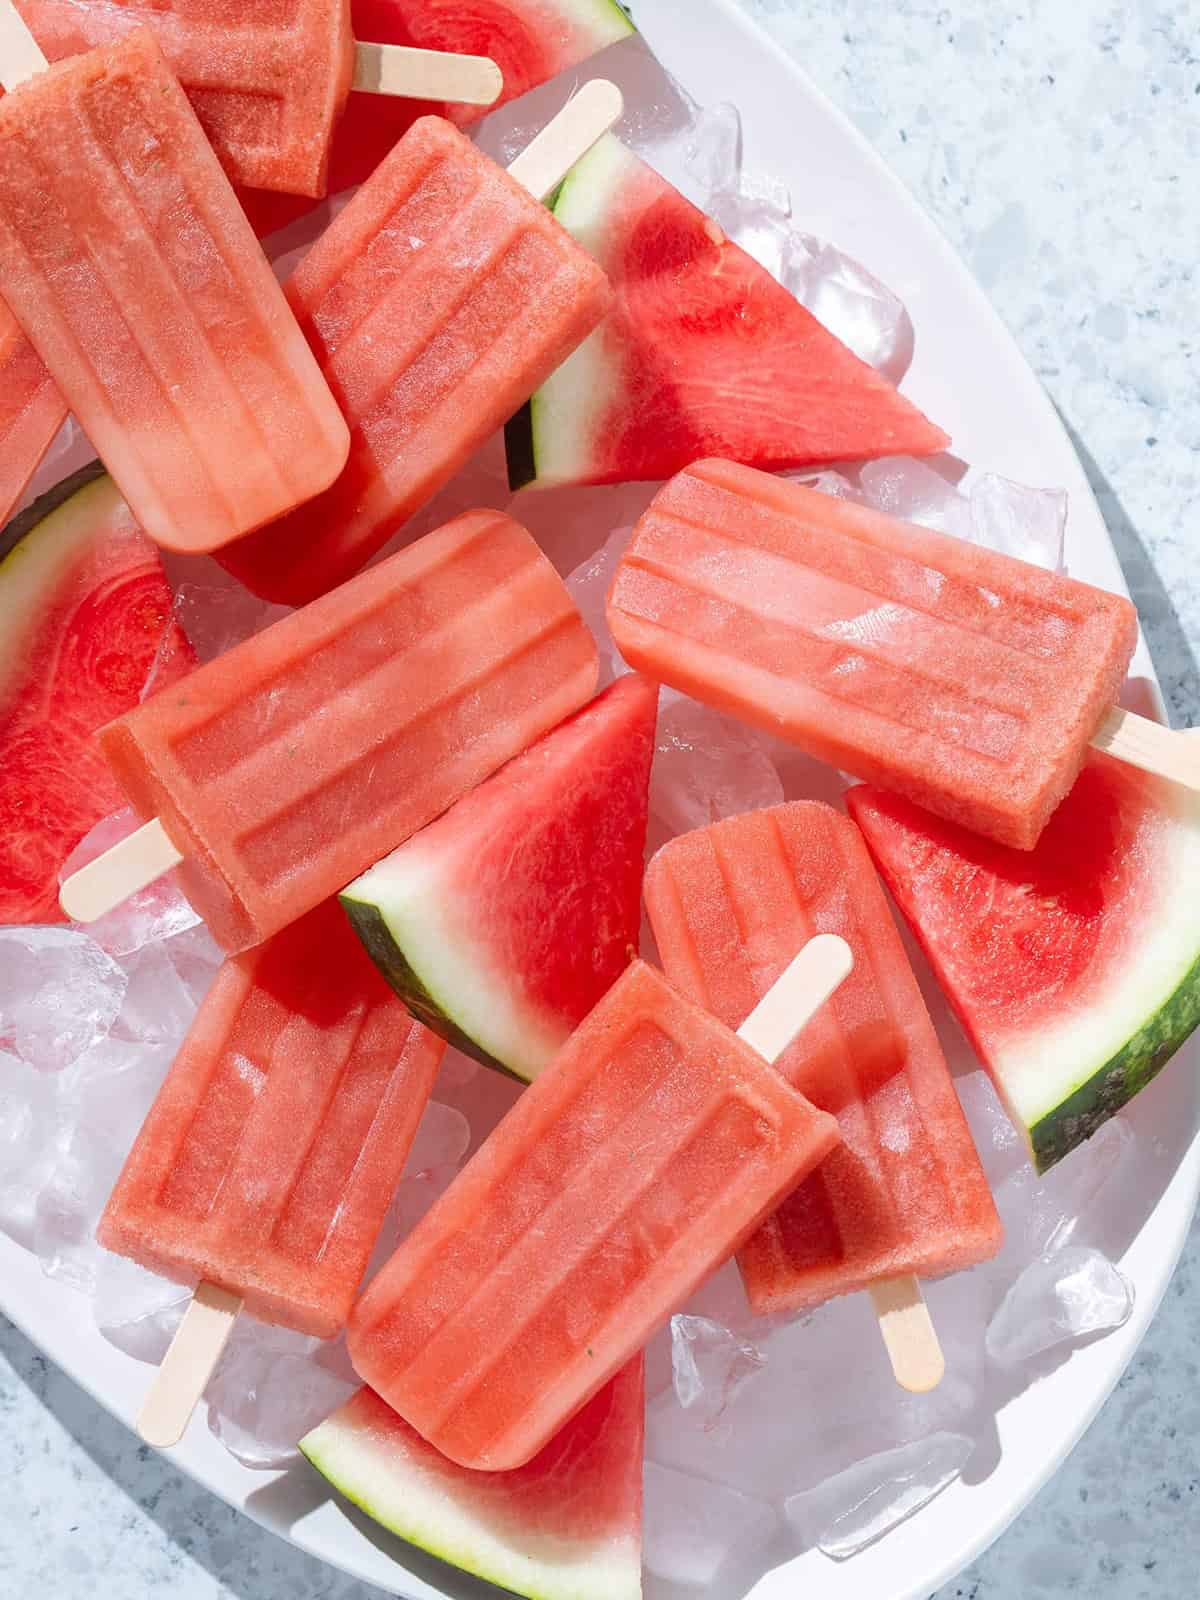 Watermelon popsicles on a plate full of ice cubes.